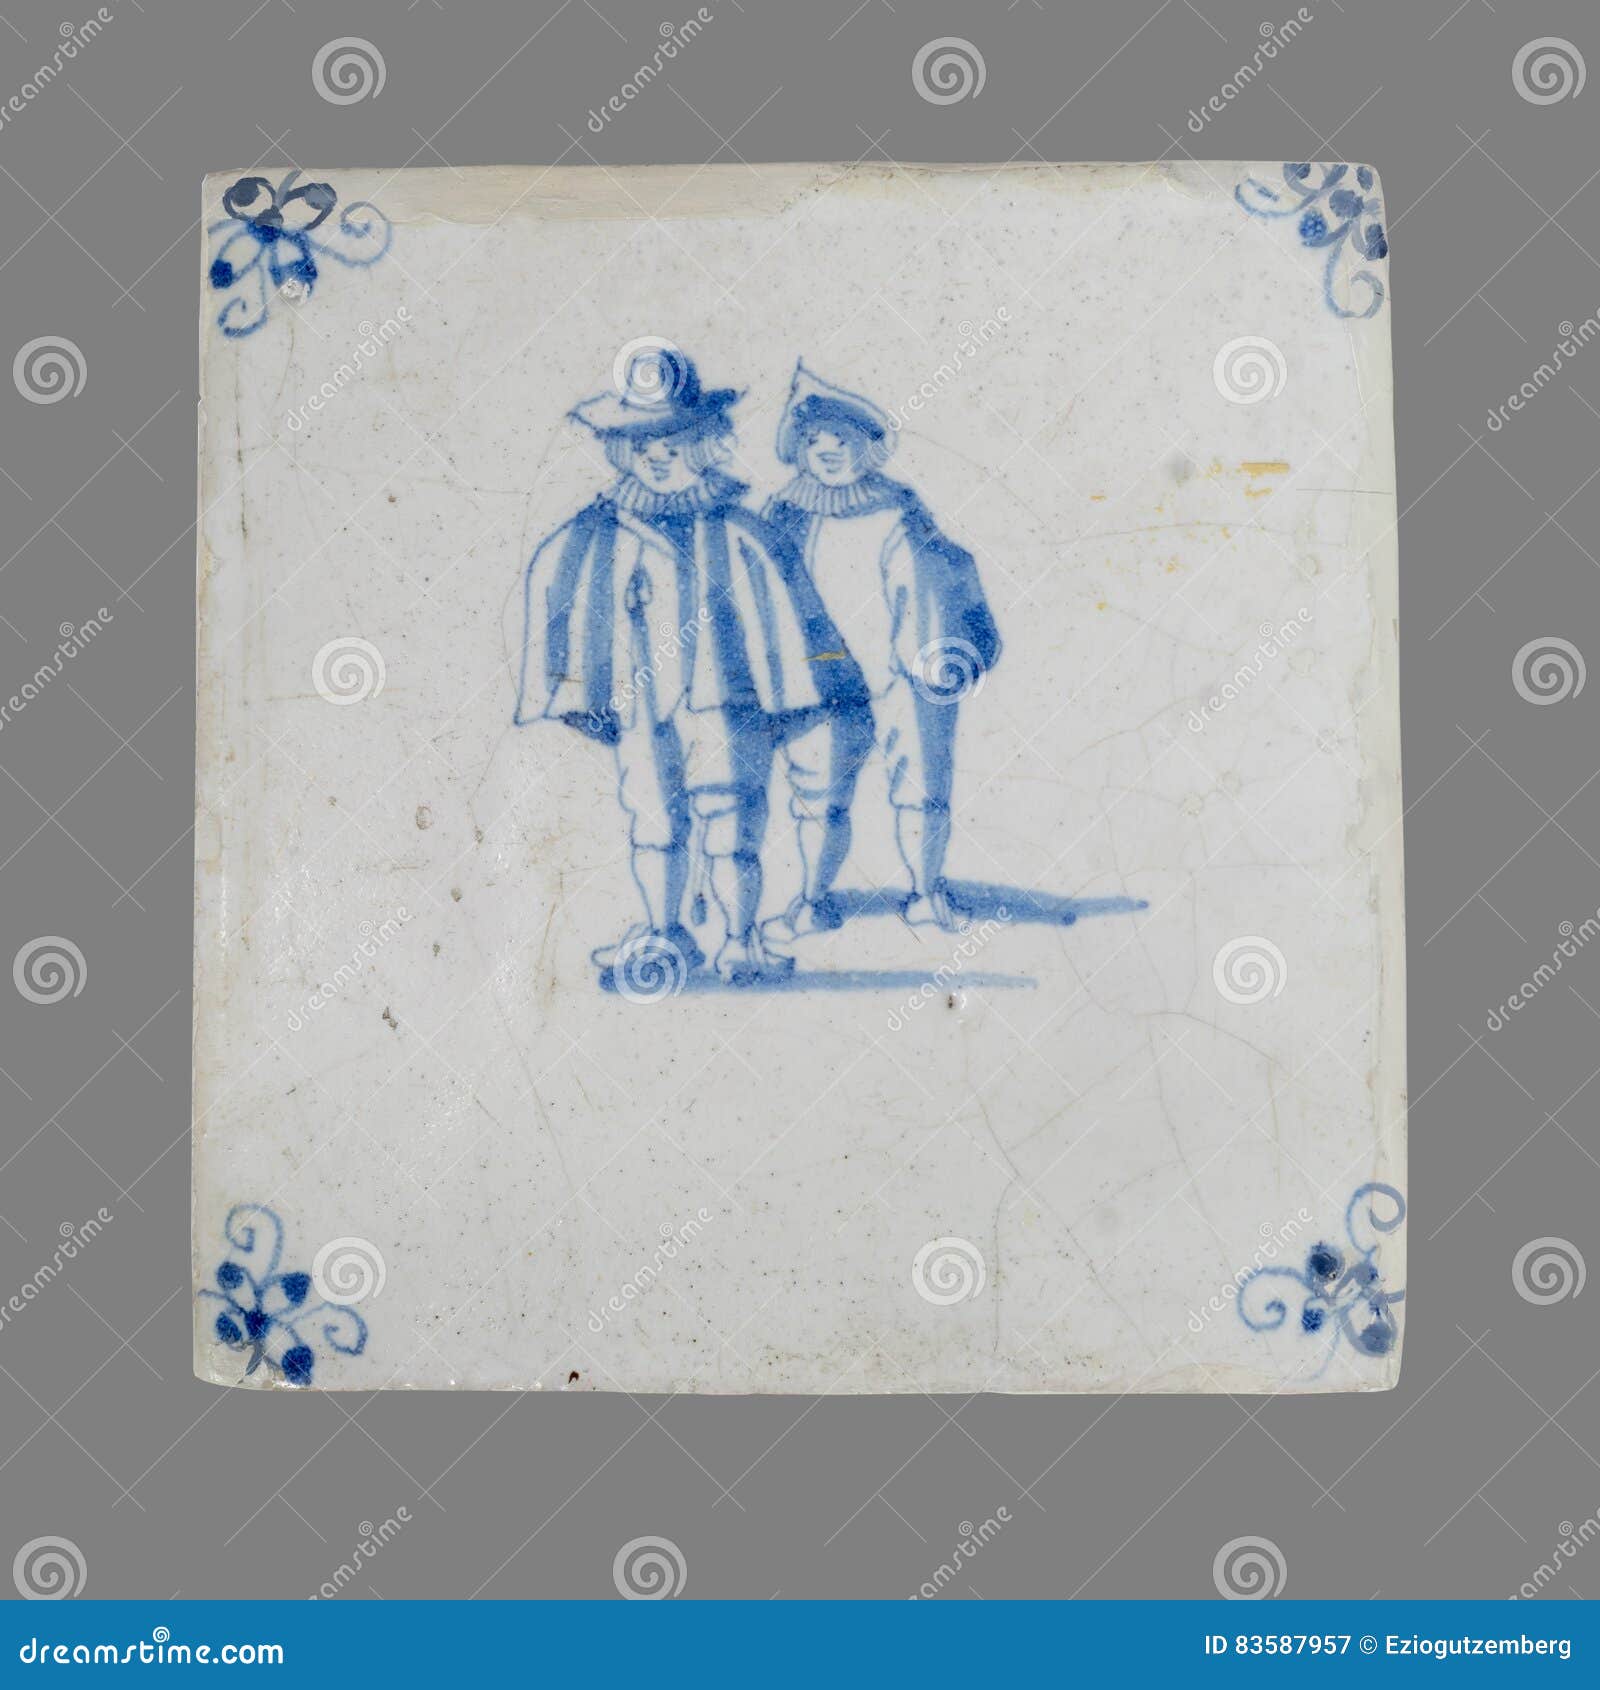 dutch tile from the 16th to the 18th century